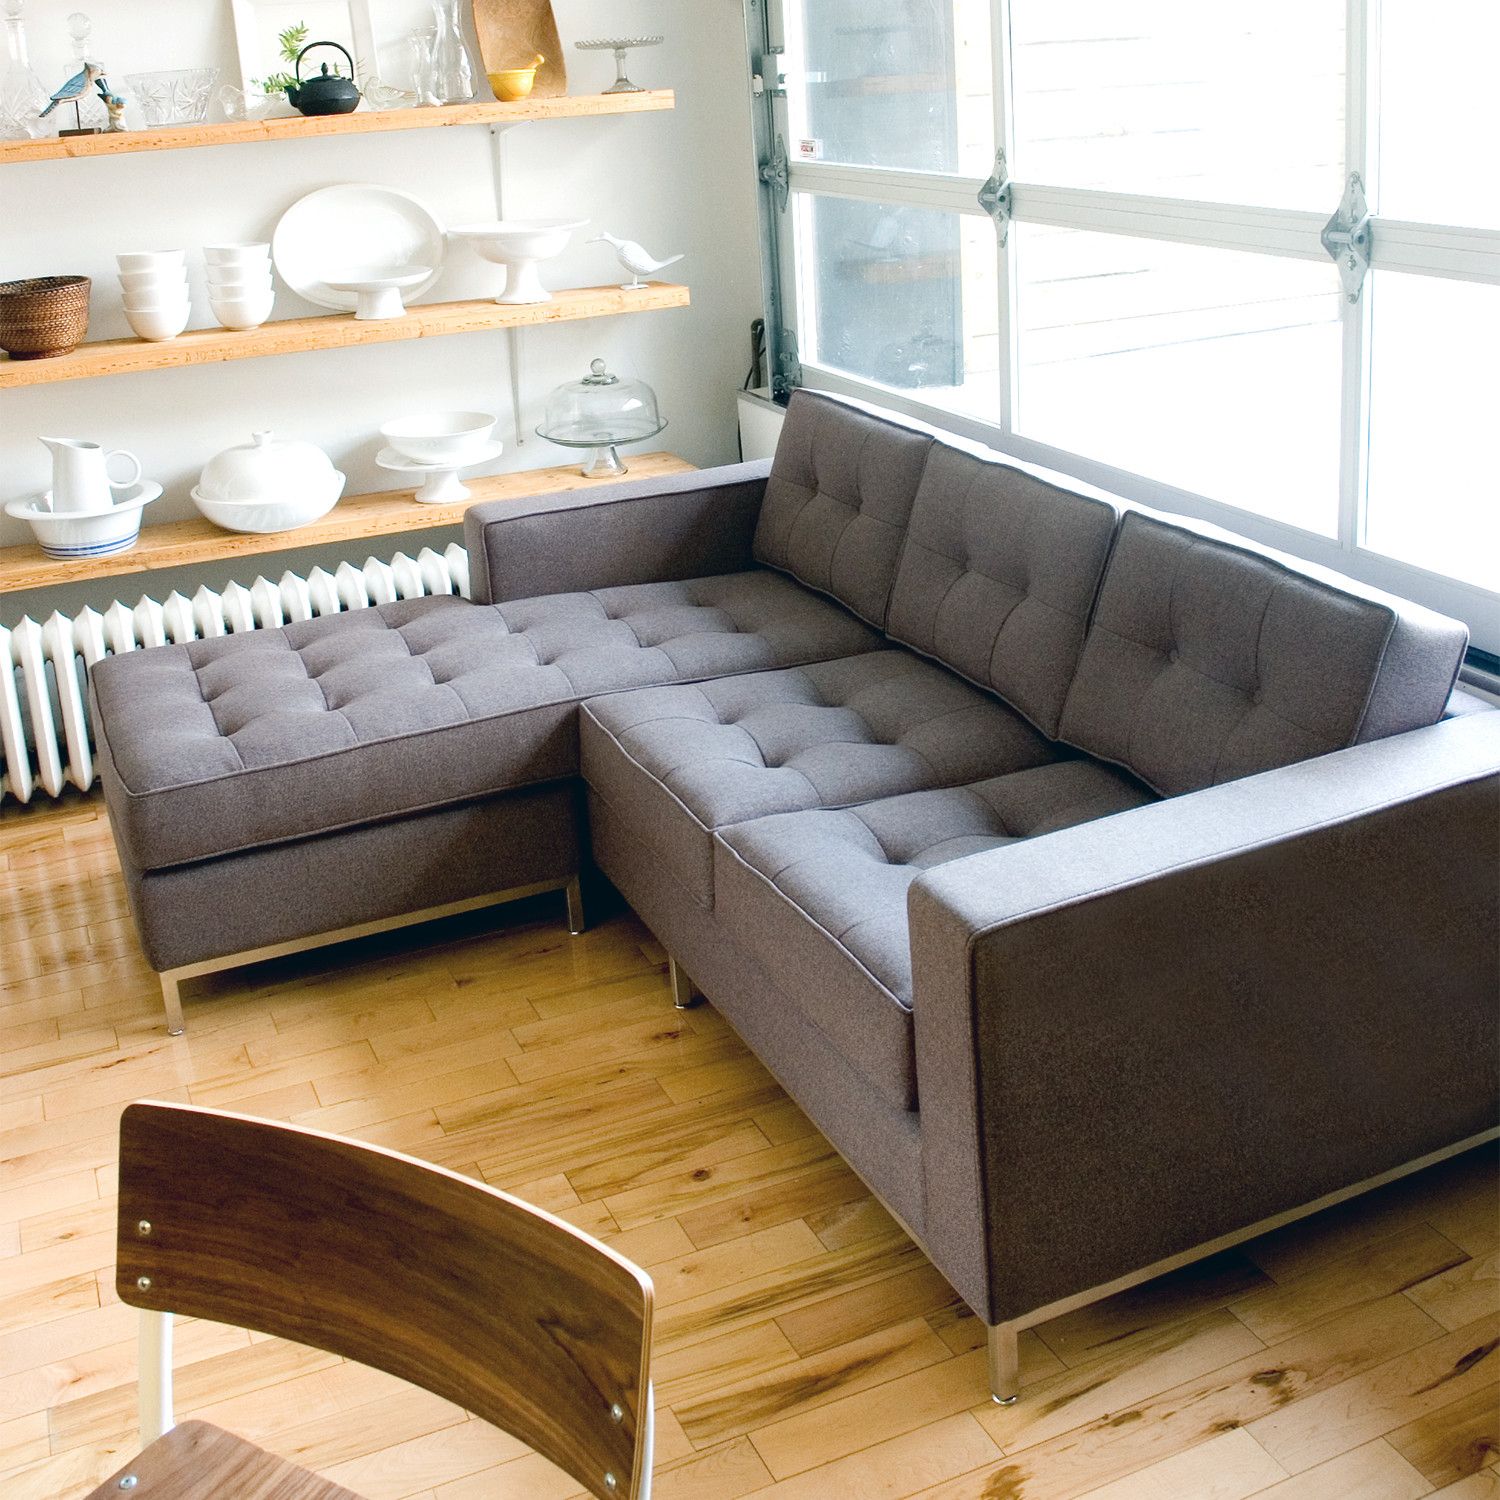 Modern Sectional Sofas For Small Spaces – Ideas On Foter Throughout Sofas For Small Spaces (Gallery 11 of 20)